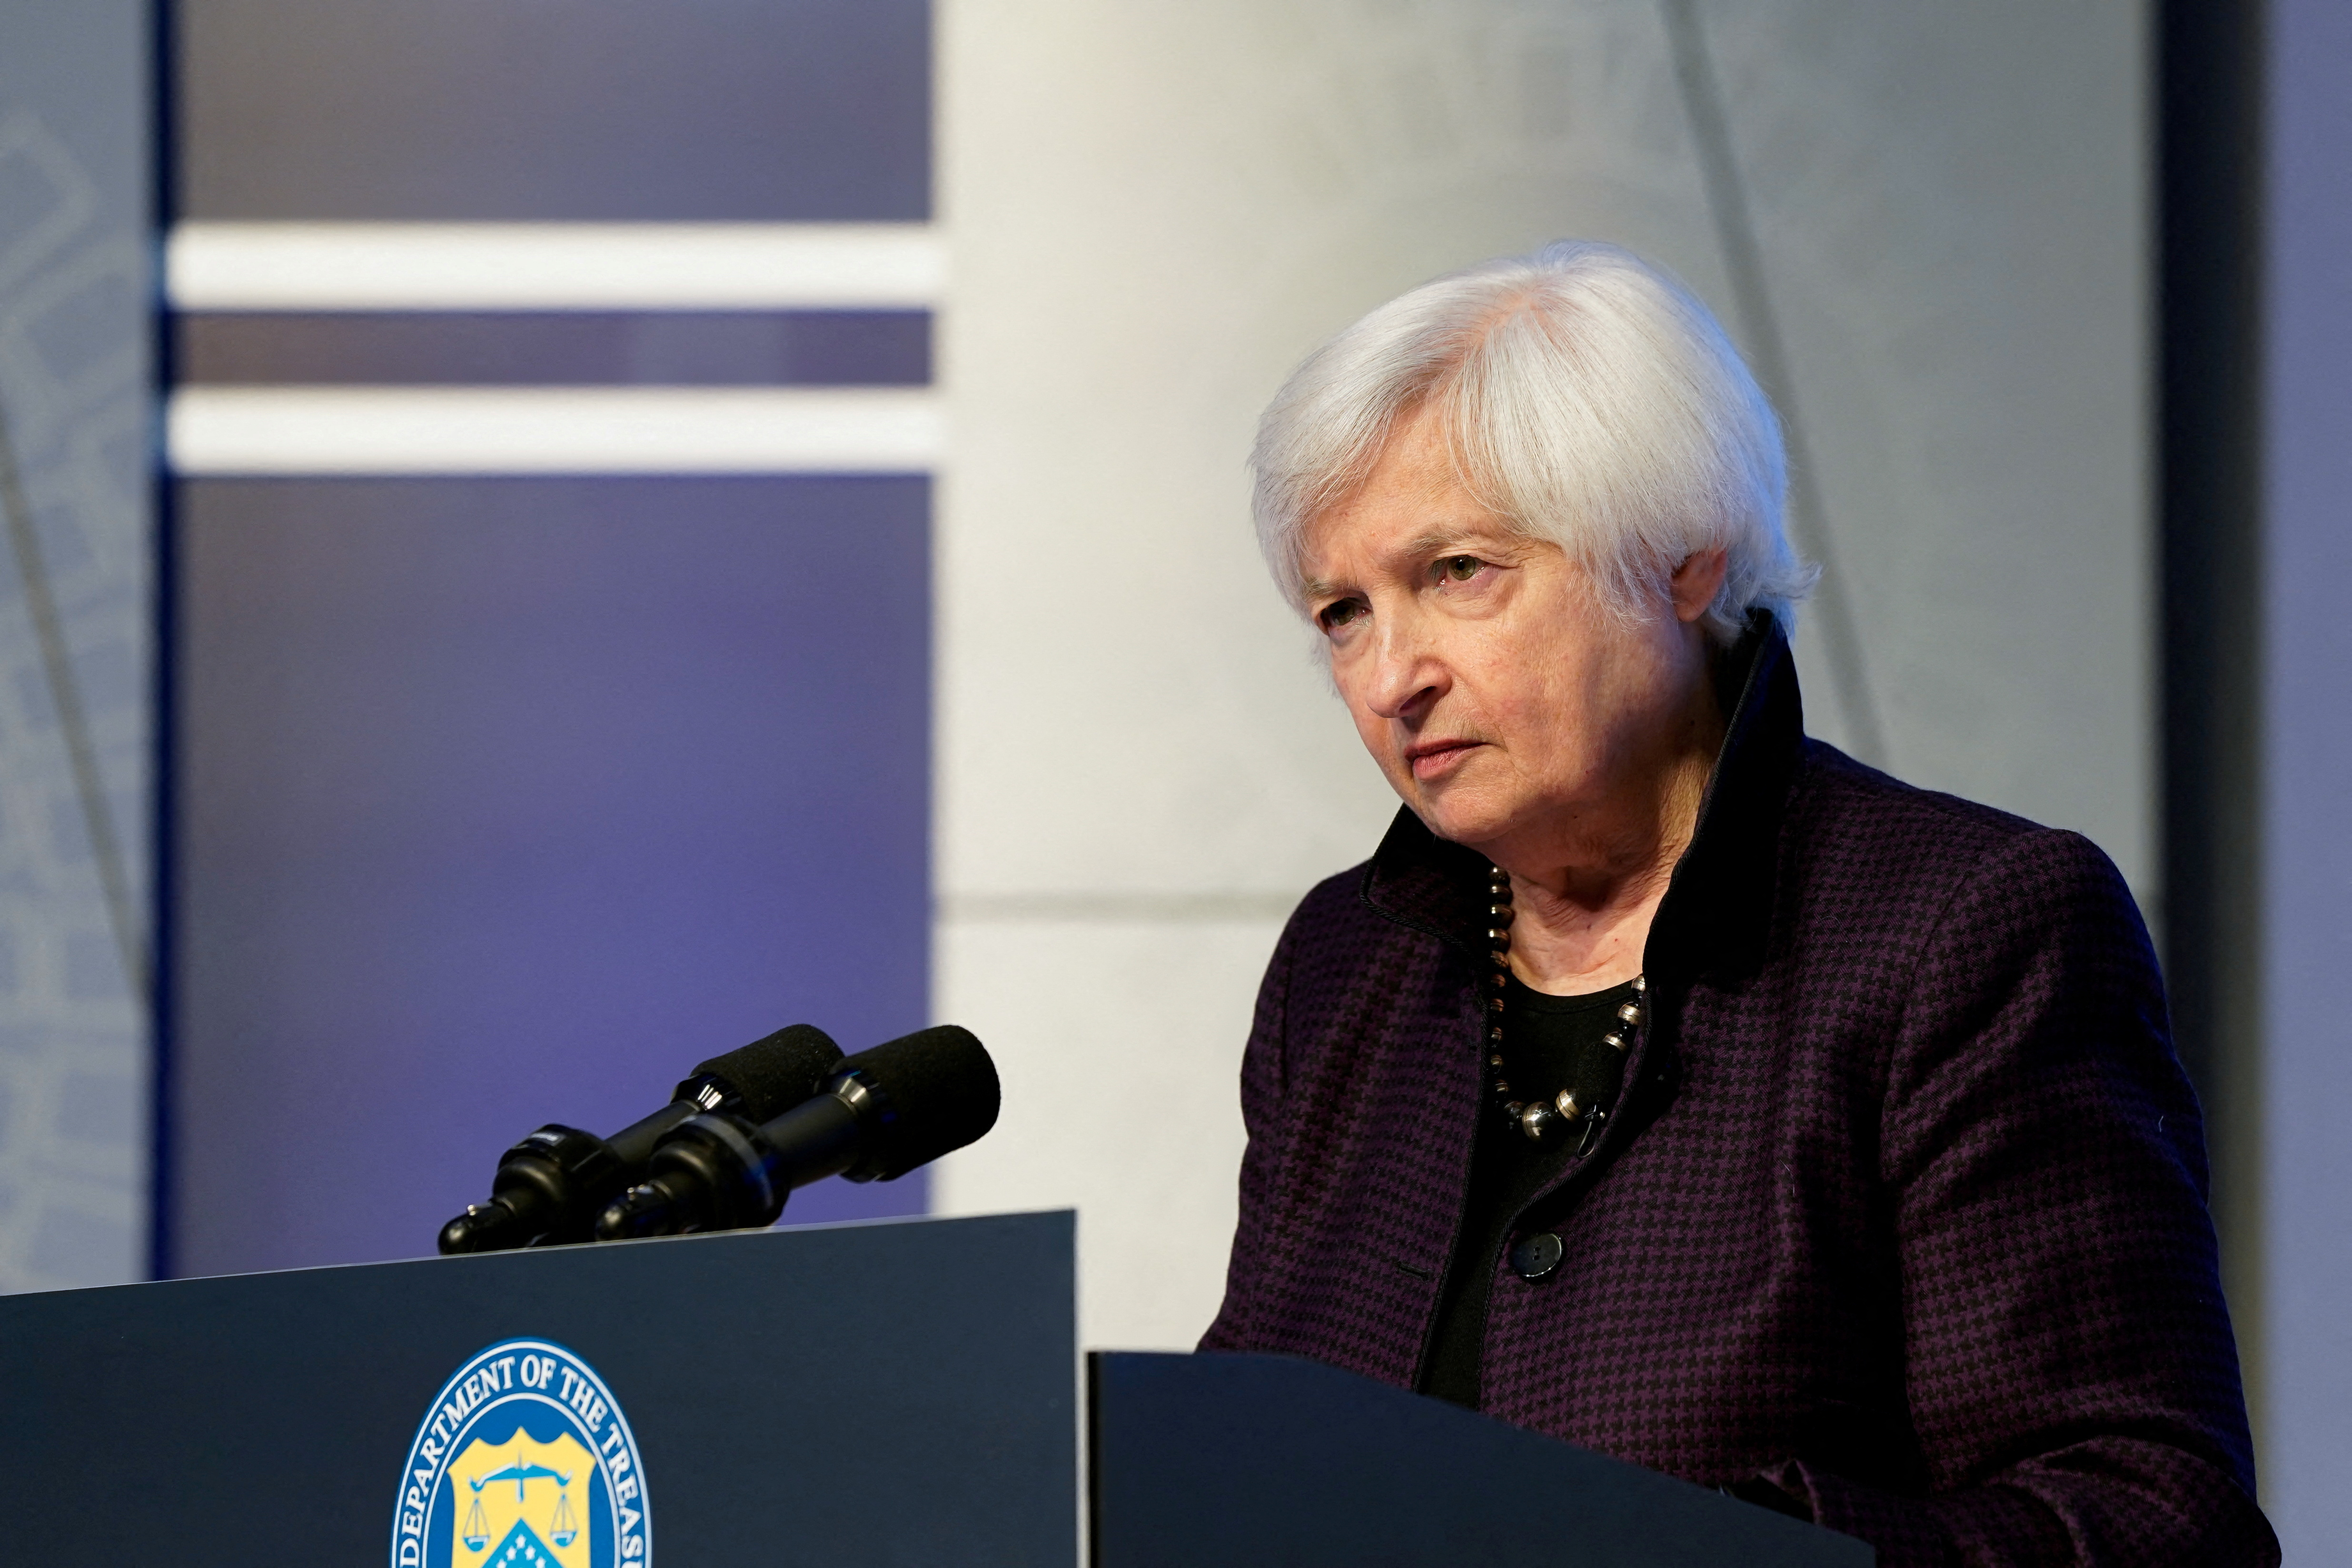 FILE PHOTO: U.S. Treasury Secretary Janet Yellen listens to a reporter's question at a news conference during the Annual Meetings of the International Monetary Fund and World Bank in Washington, U.S., October 14, 2022. REUTERS/Elizabeth Frantz/File Photo